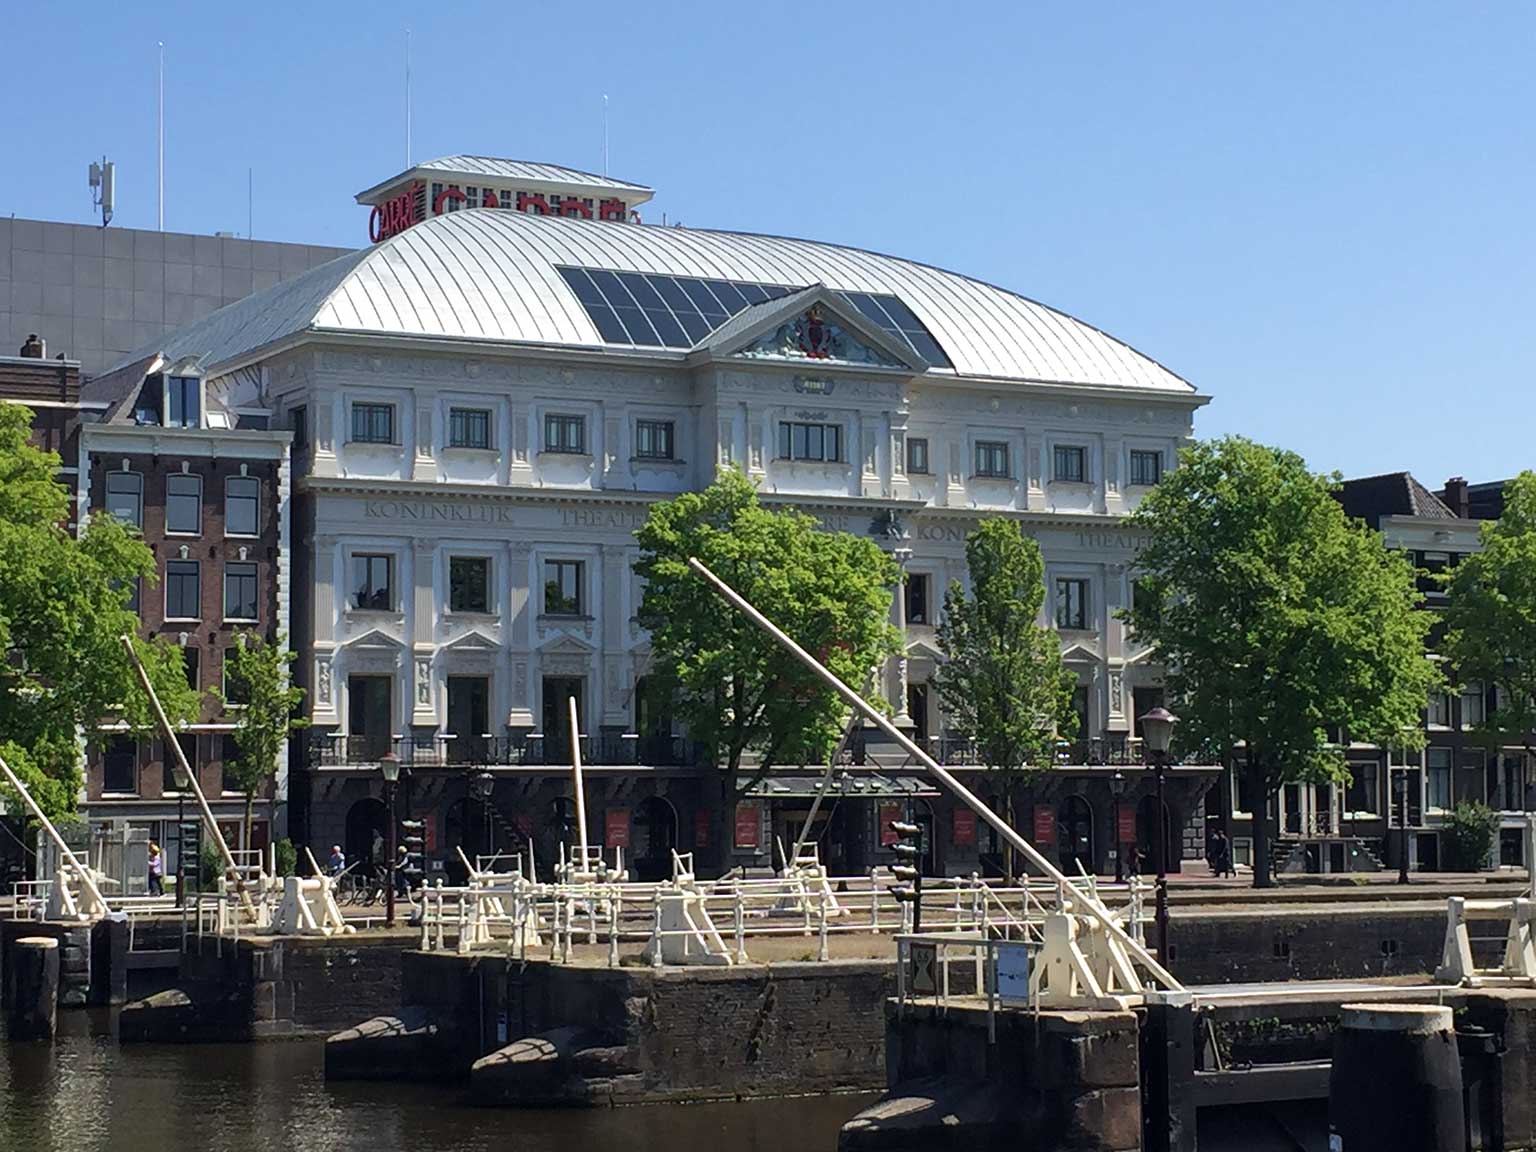 Amstel Locks, Amsterdam, with Theater Carré in the background